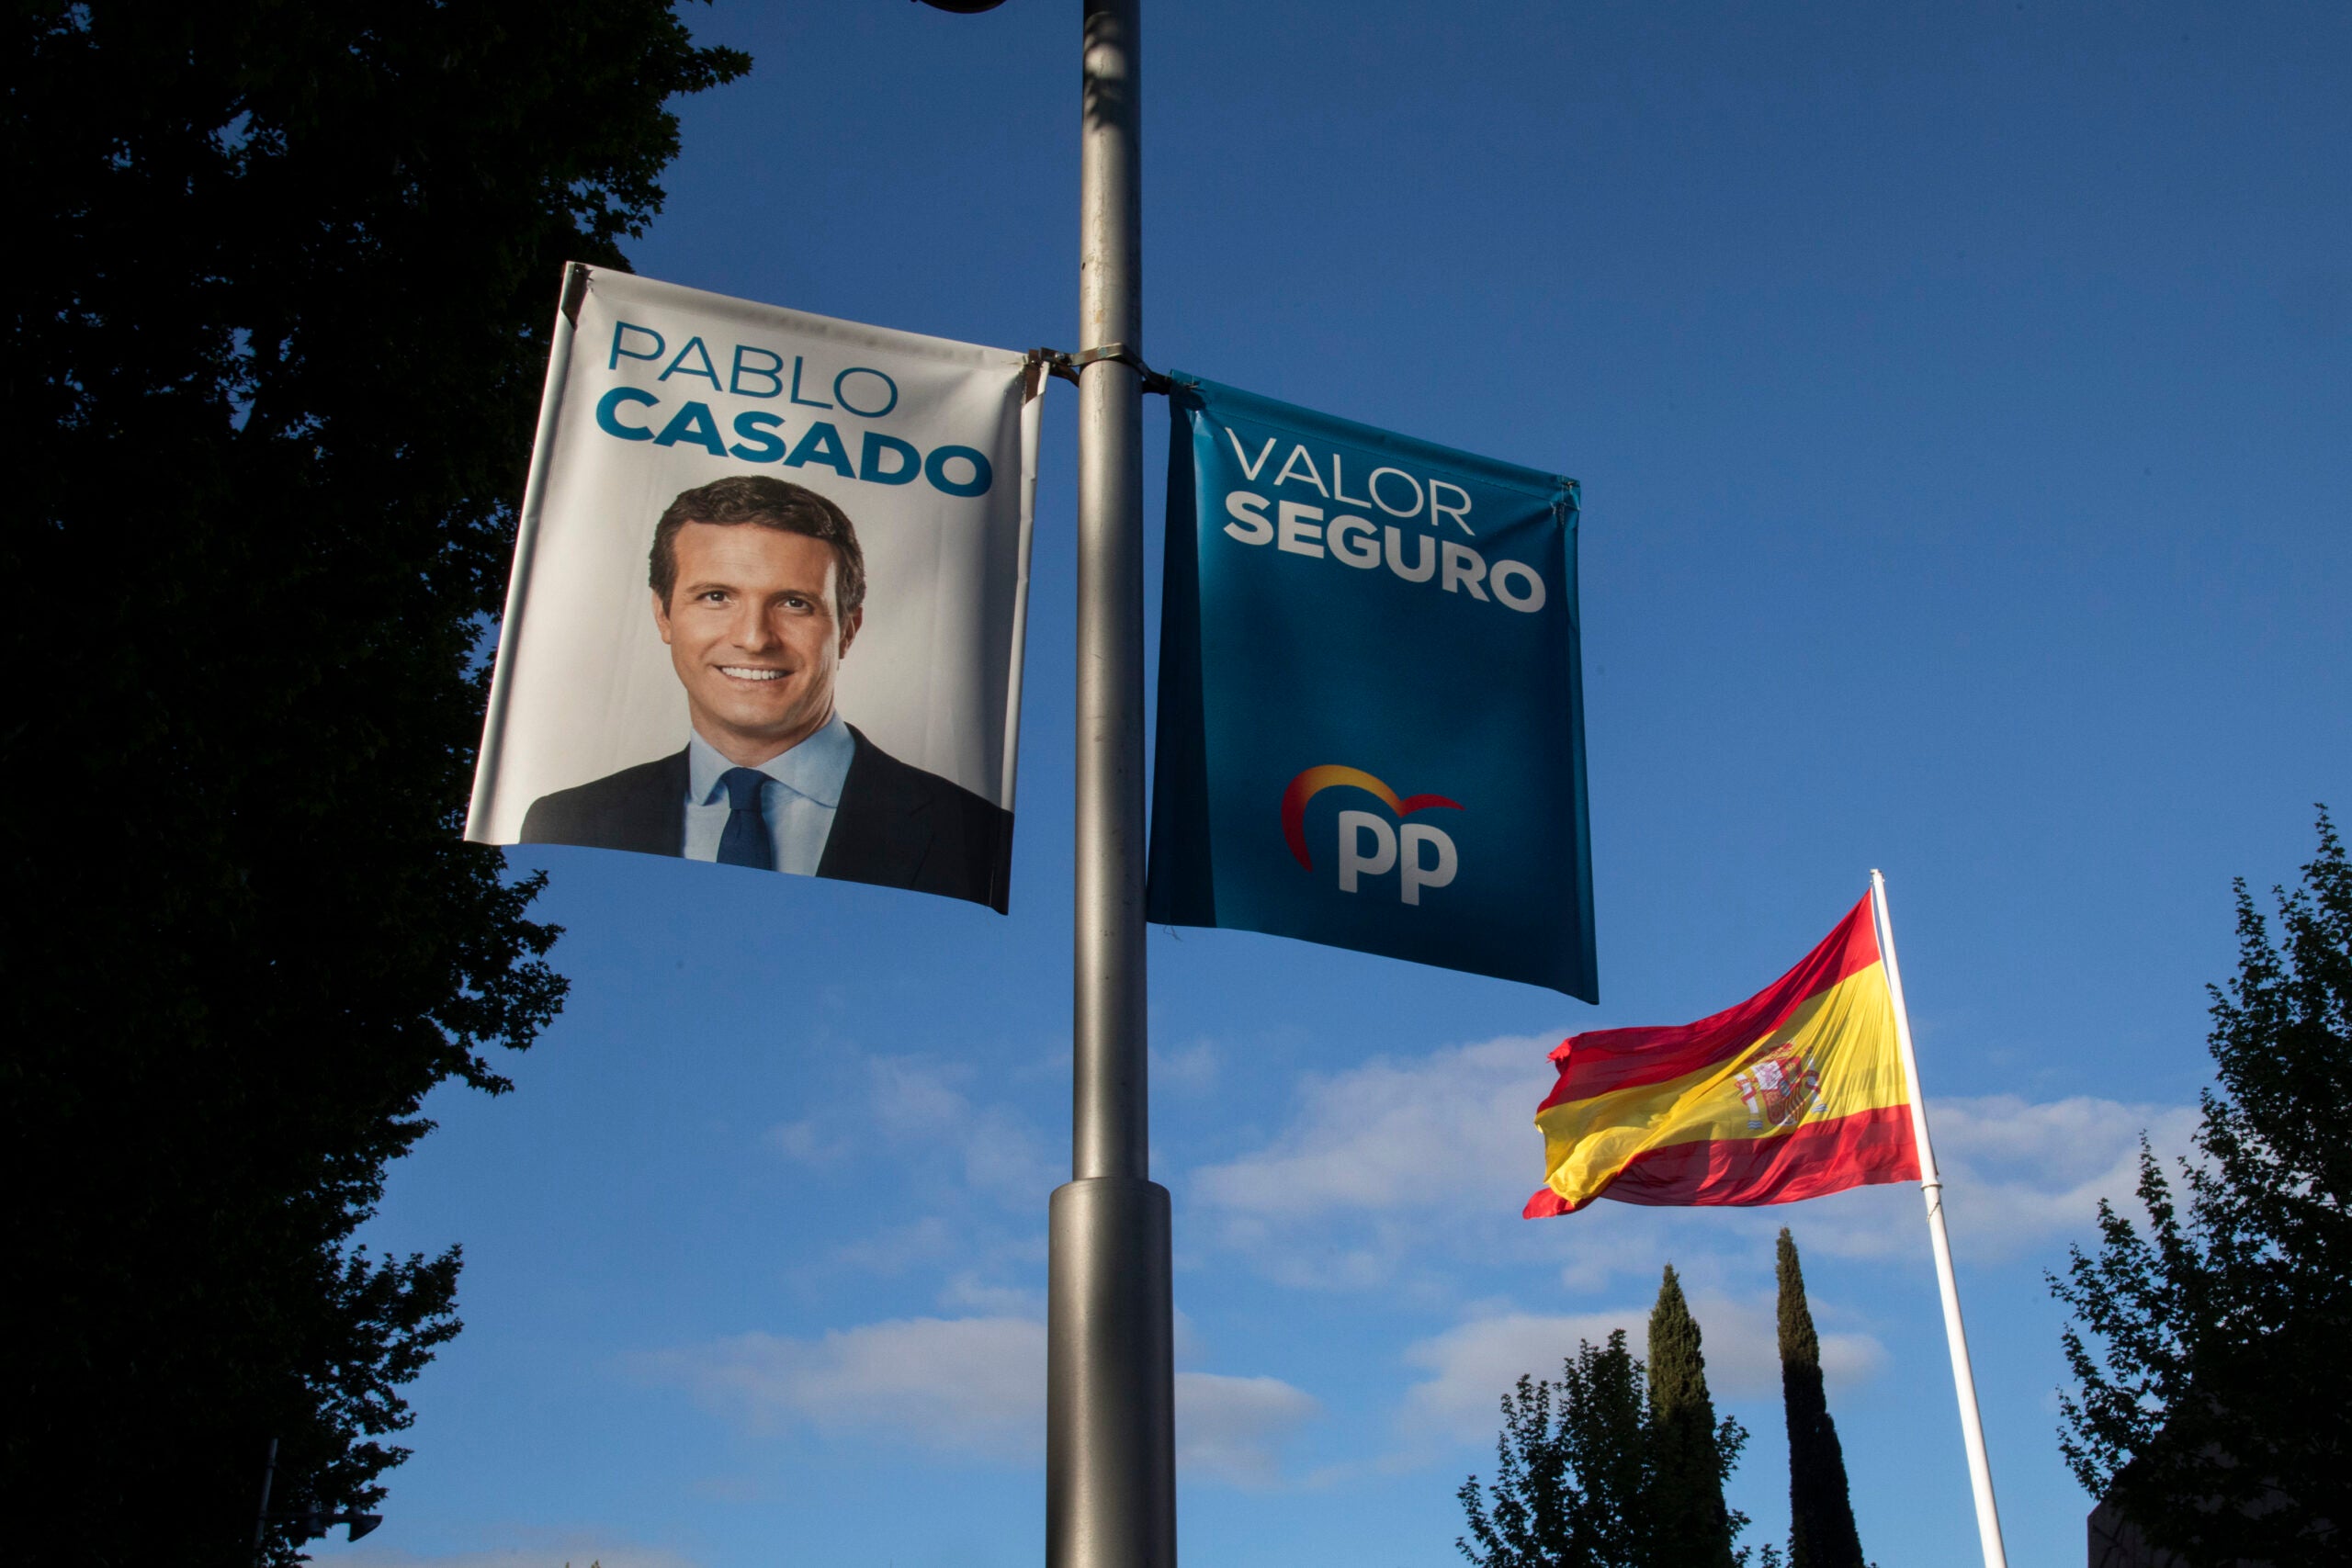 Ahead of Sunday’s election, Spain is still haunted by recessions and resentment over Catalonia